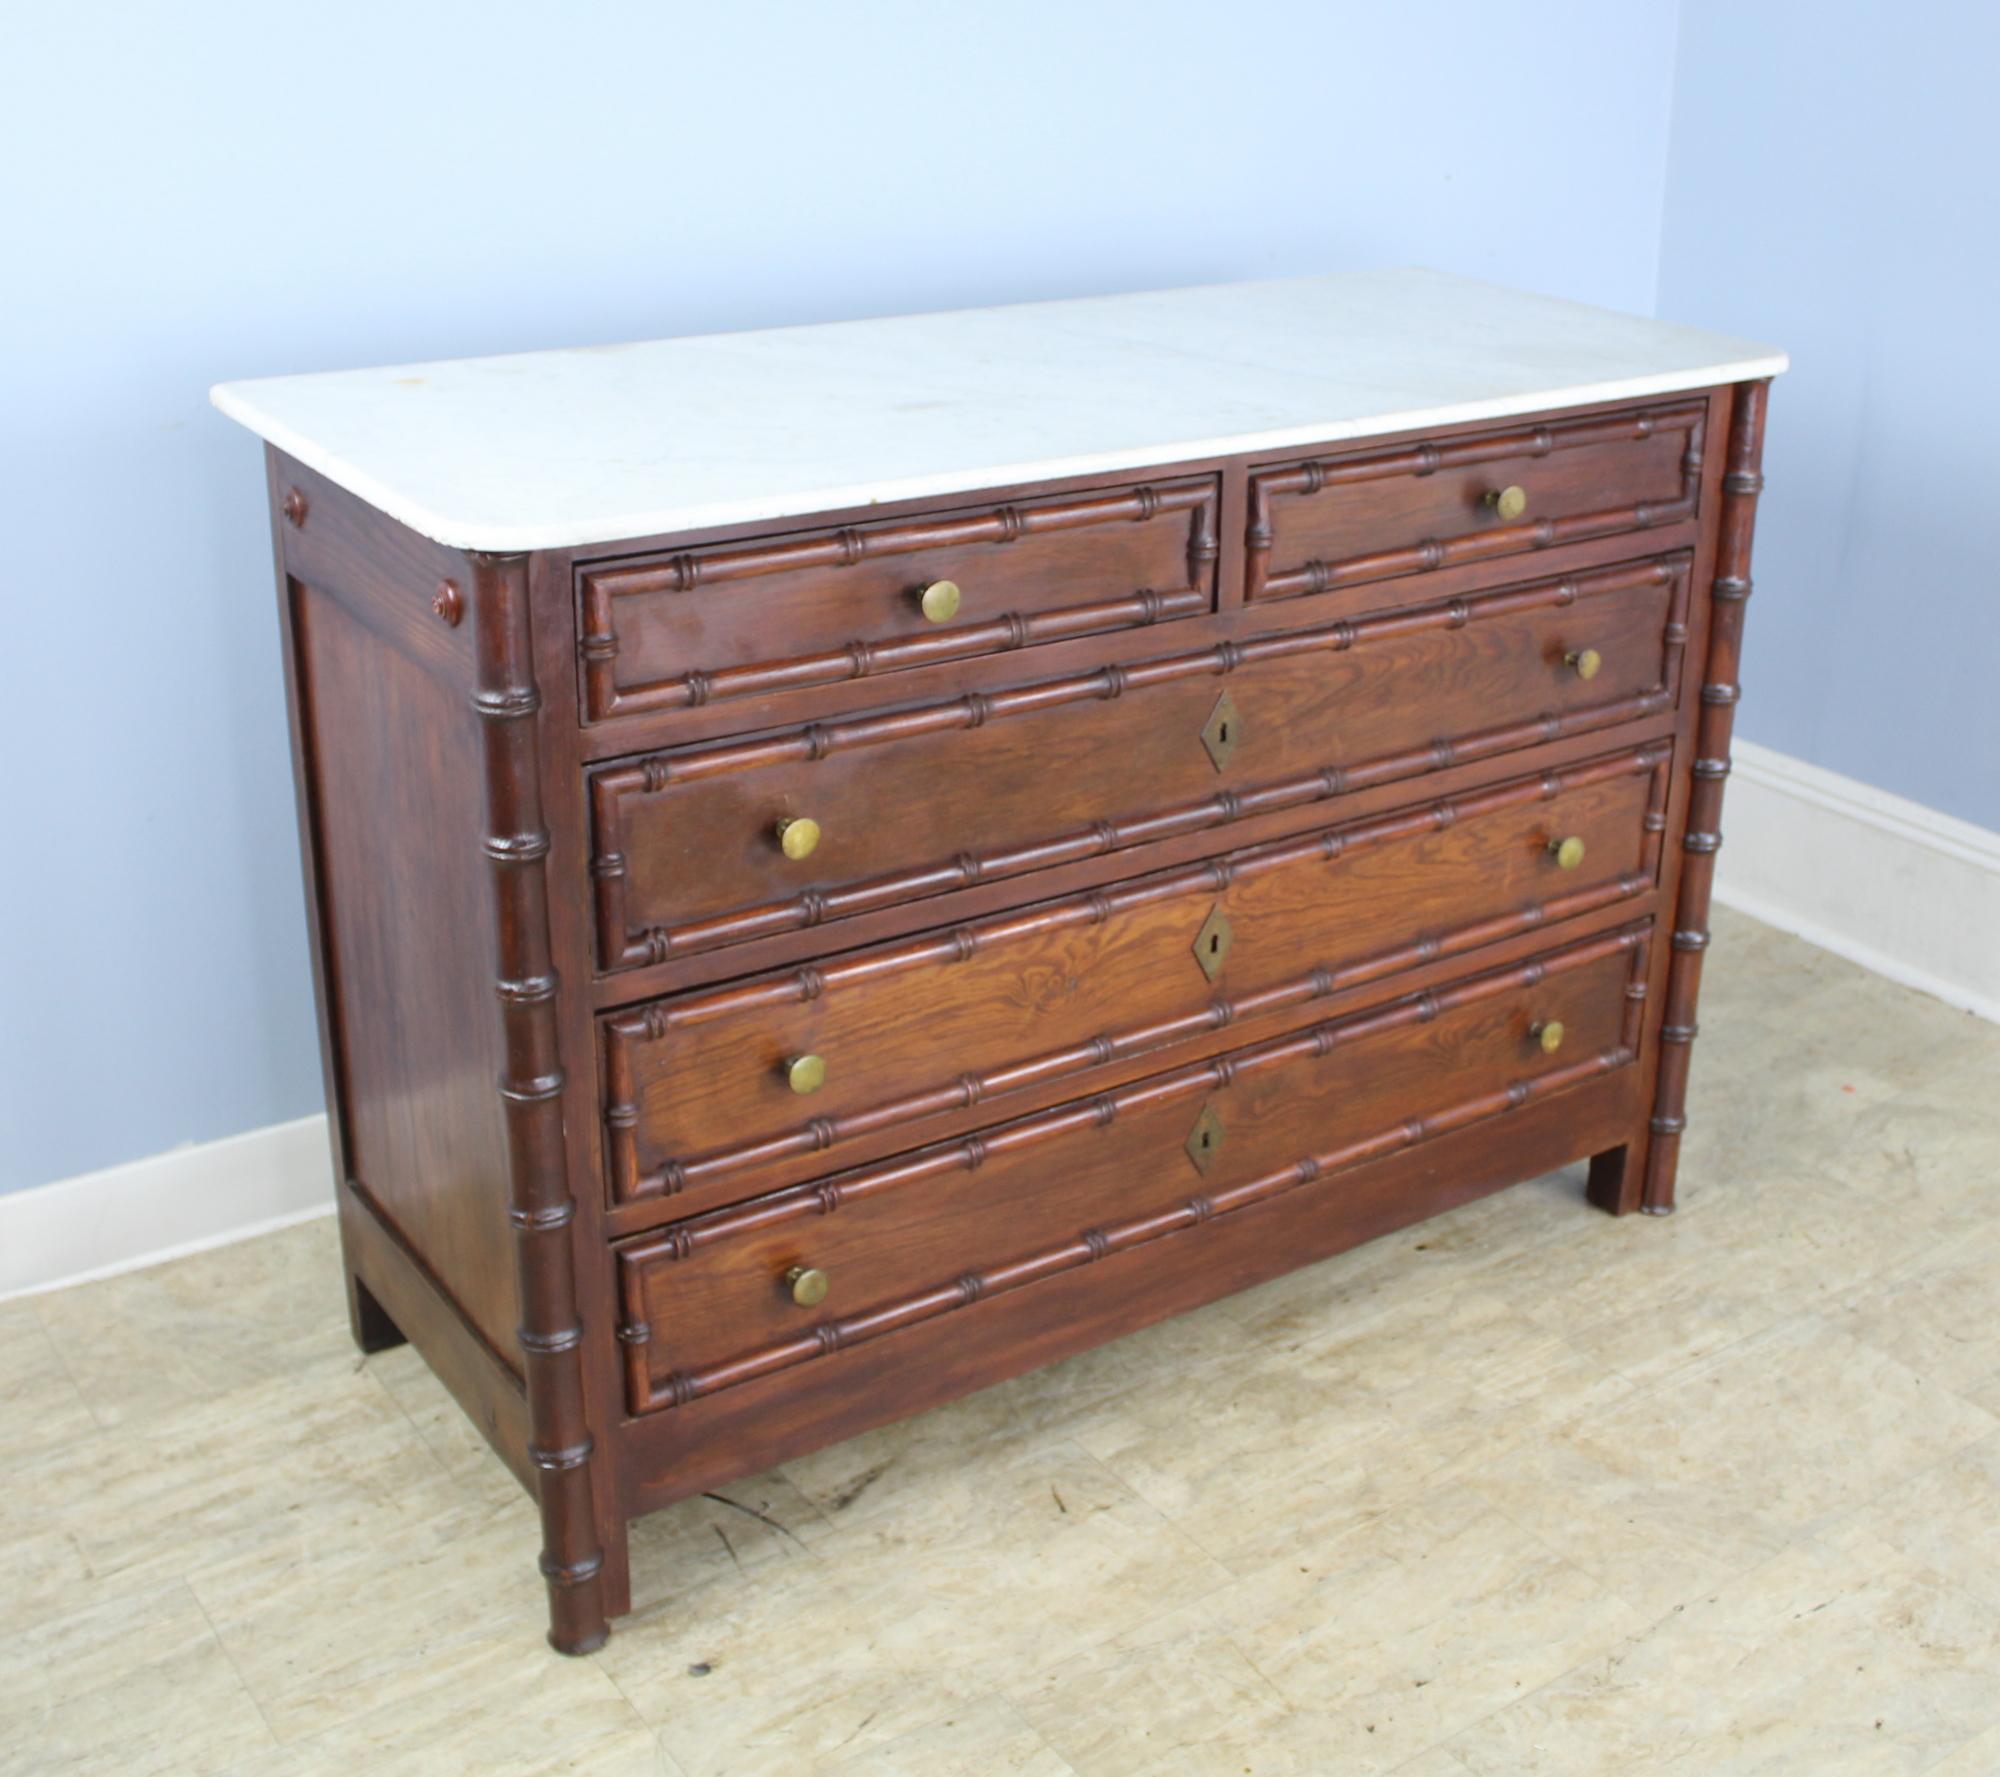 A charming dark pine chest of drawers with faux bamboo columns and mouldings. Classic two-over-three-drawer construction. The interiors of the drawers are clean and the drawers open easily and shut snugly. The marble which is original is fine